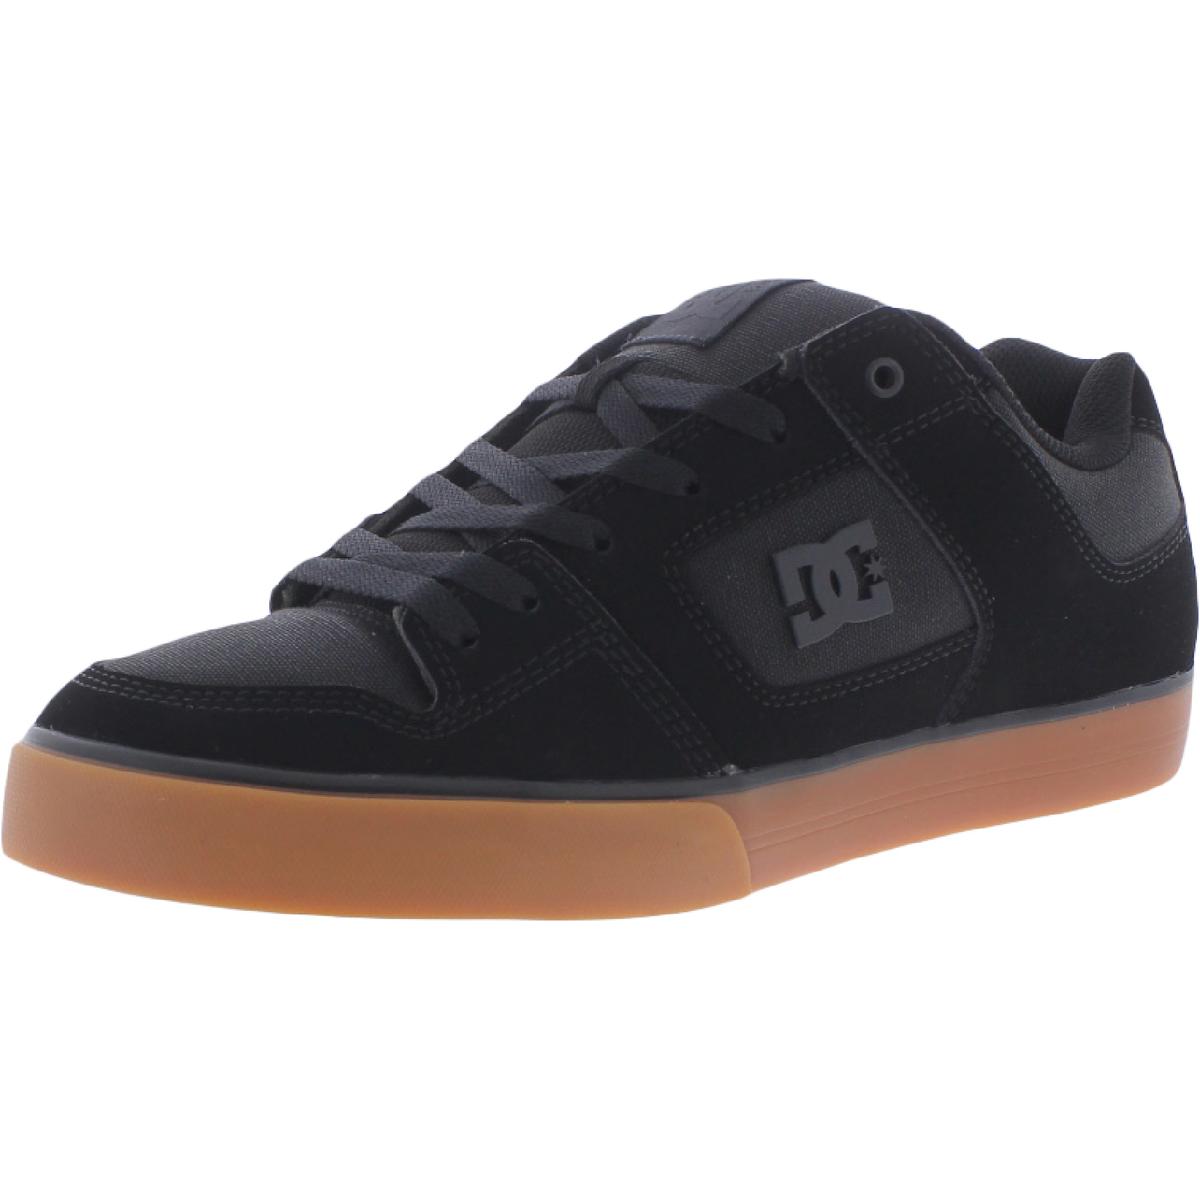 DC Council S Lo LOW Top SUEDE Leather SKATE Board SKATER SHOES Sneakers MEN size 